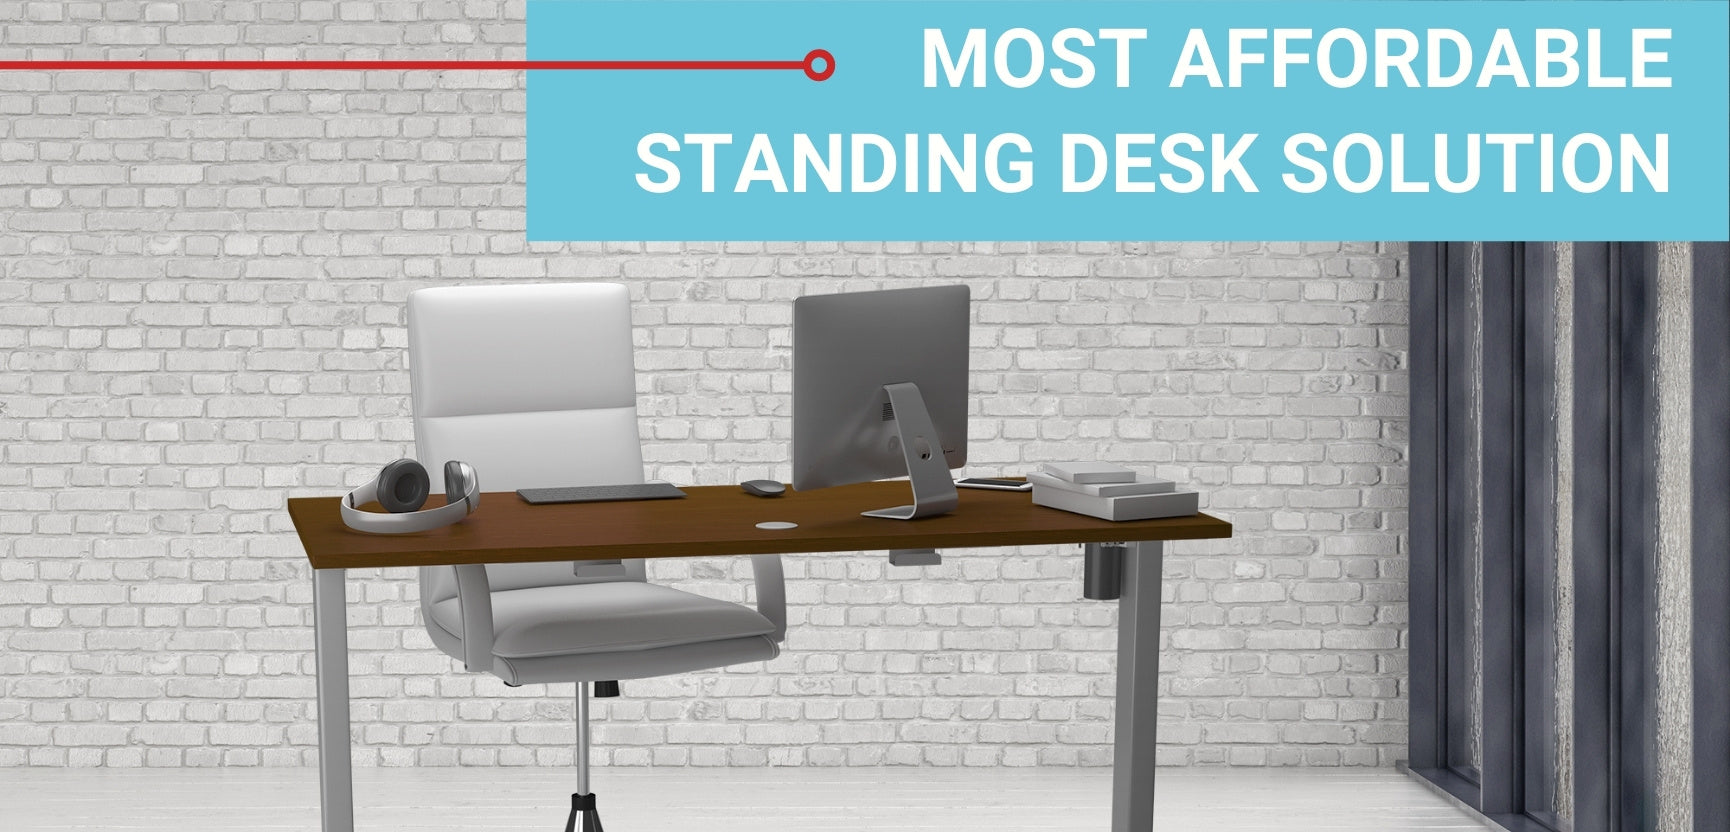 The Economy Ryzer - Our Most Cost-Effective Standing Desk!